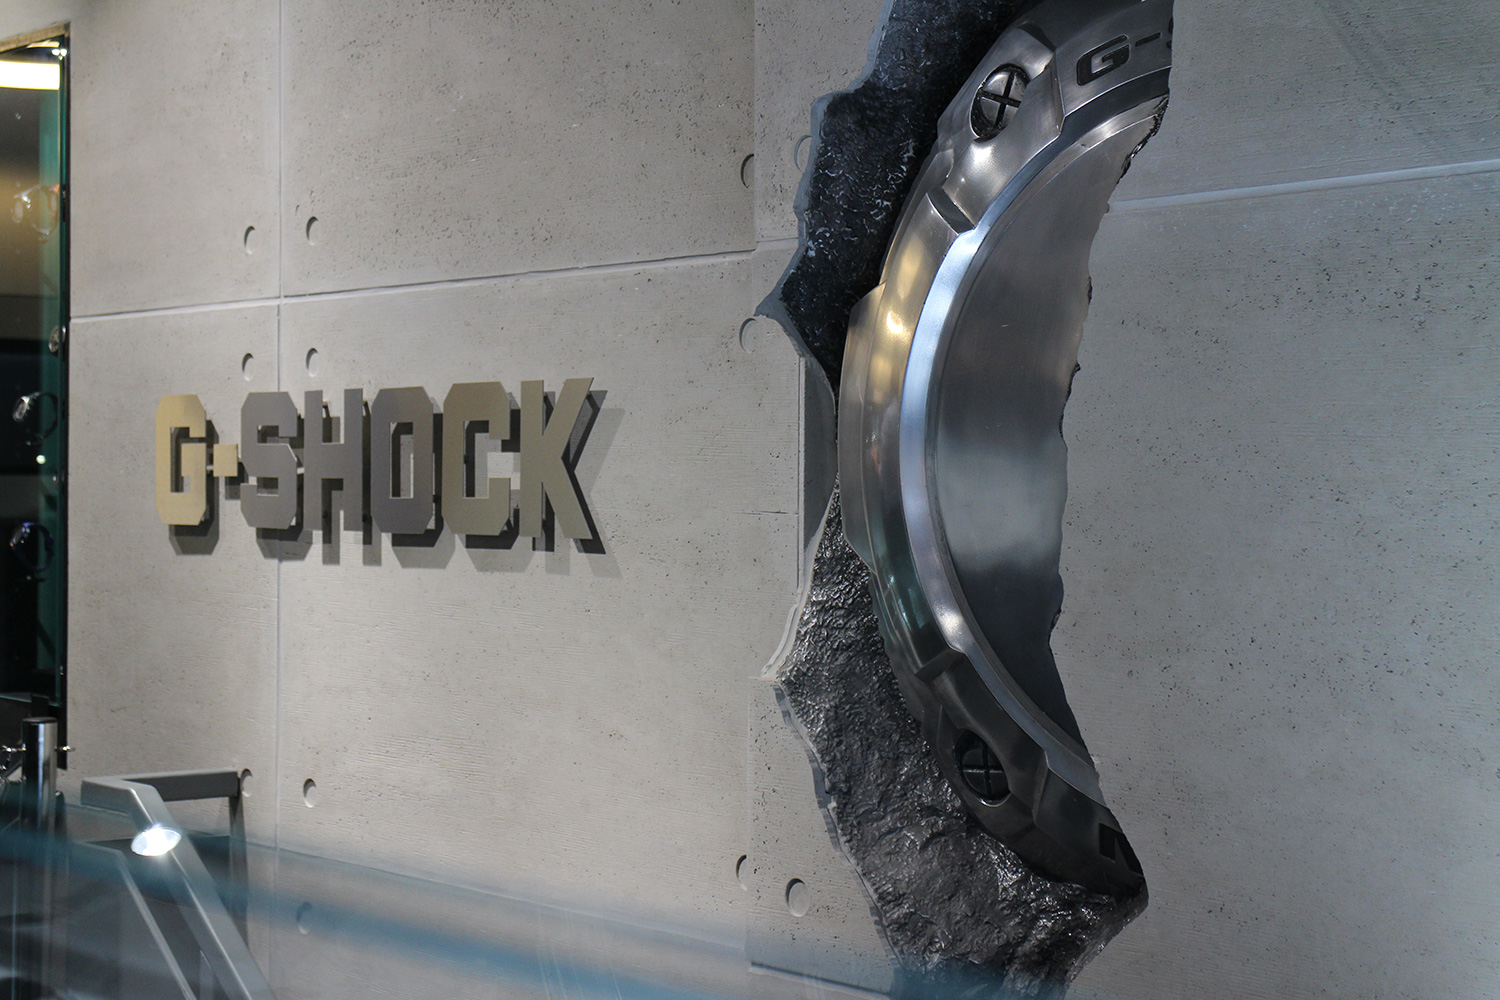 G Shock store sign wall